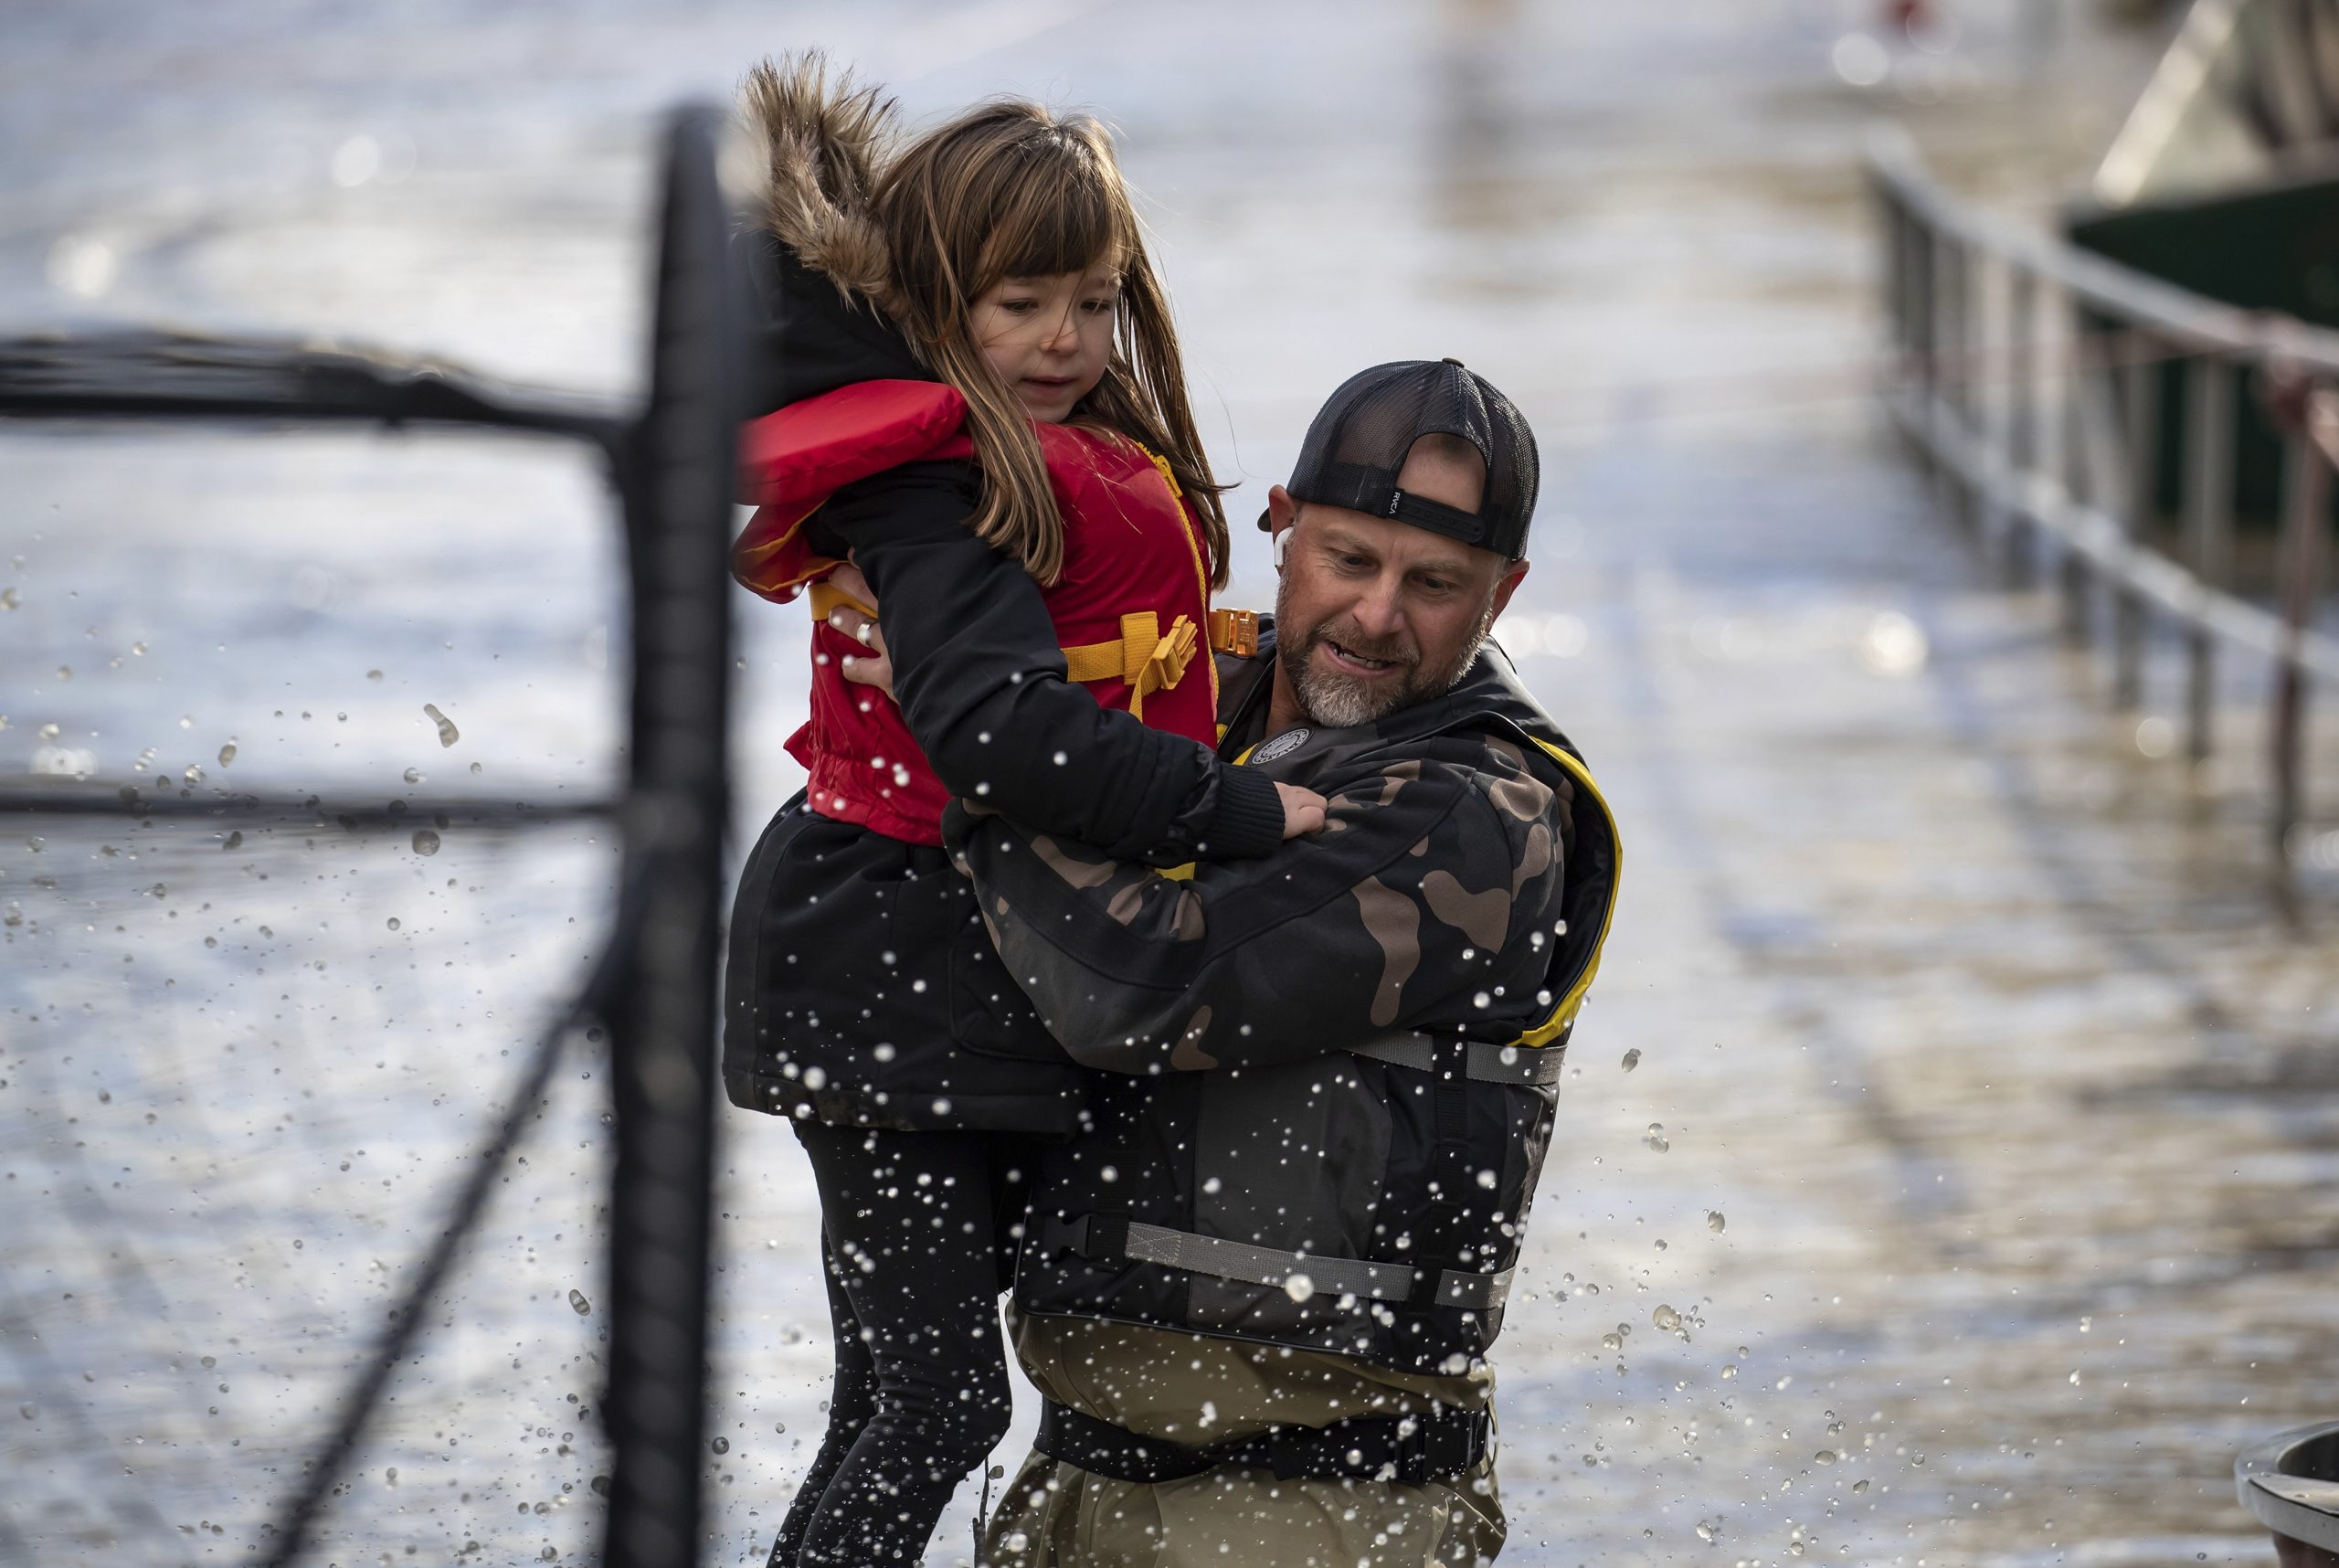 A flood emergency has been declared in Canada